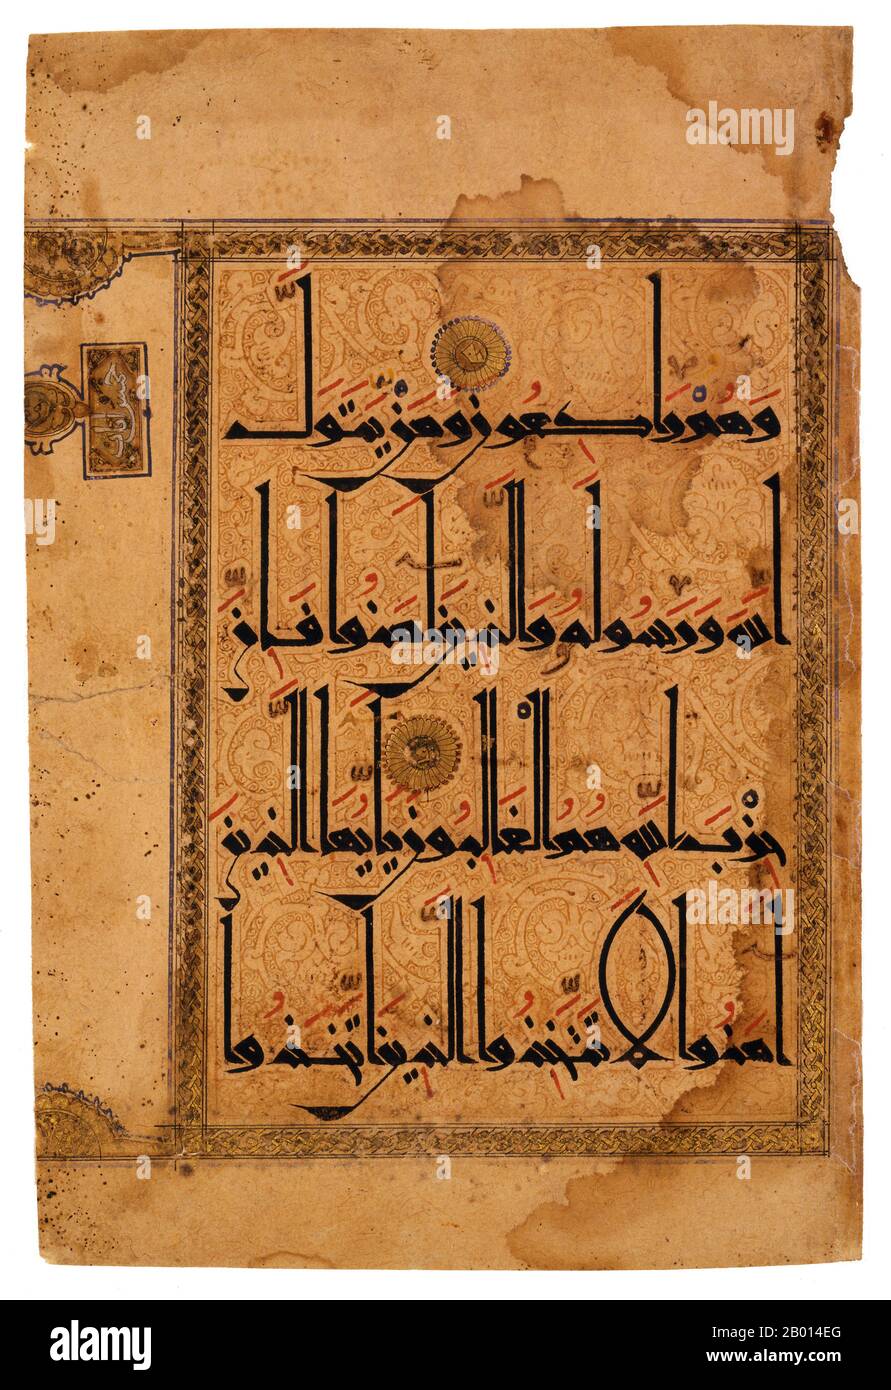 Iran: Illustrated page from an 11th century Qur'an written in Eastern Kufic script.  Eastern Kufic script is distinguished by tall upstrokes that often have left-facing serifs and curved downstrokes. The various diacritical marks that facilitate reading are carefully marked with red, blue, and black. Eastern Kufic was introduced in the 10th century at the same time as paper became the preferred material for Korans in the eastern Islamic world. Stock Photo